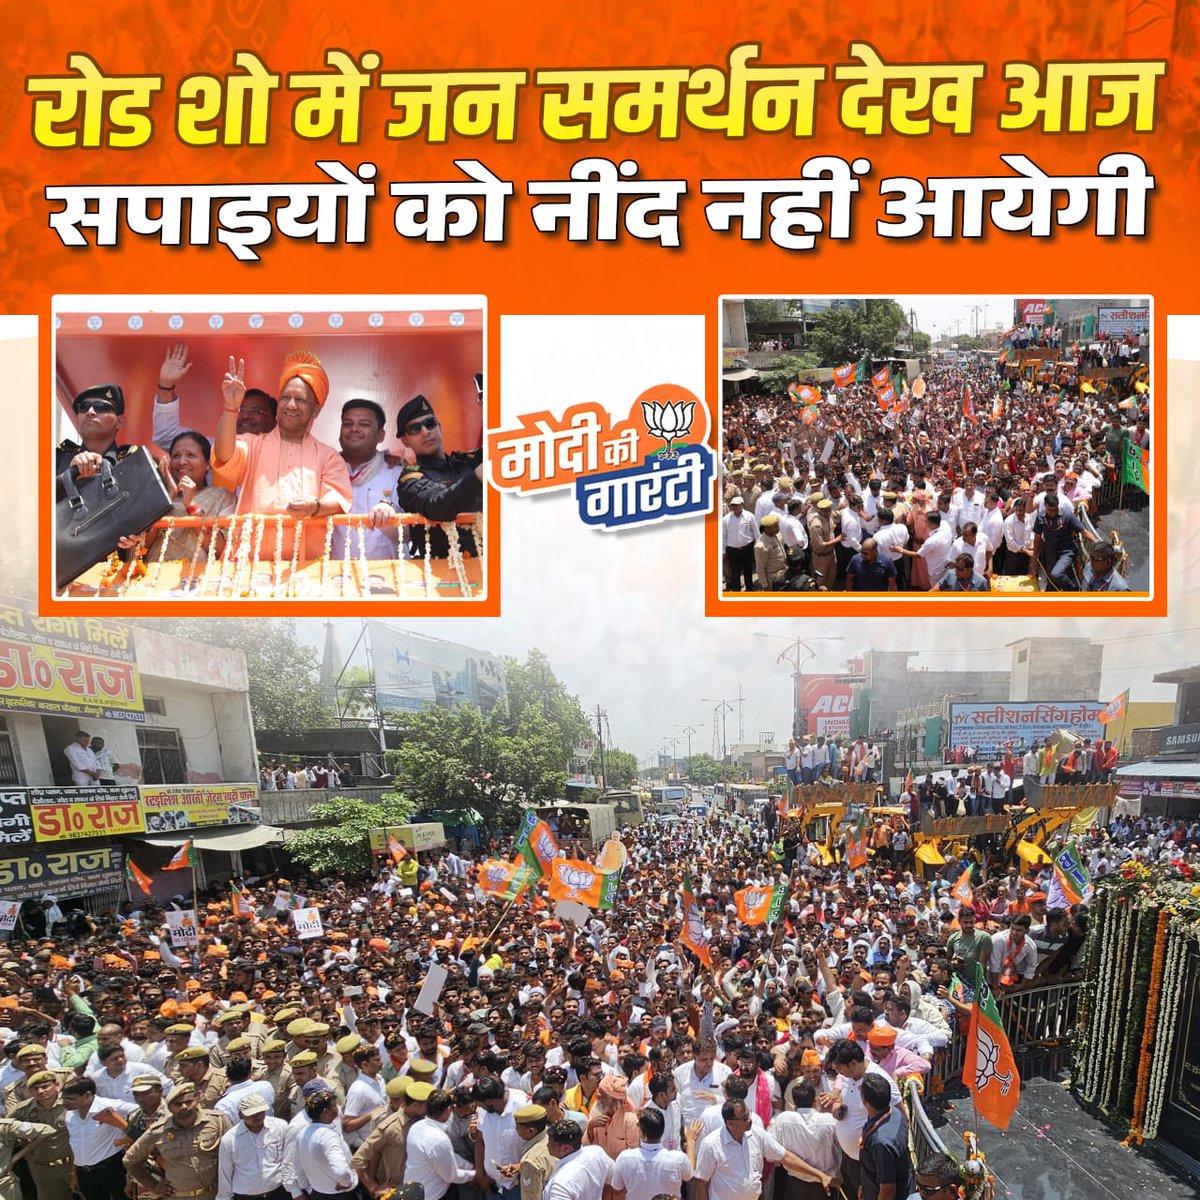 Today's roadshow was a testament to the overwhelming support for Jaiveer Singh in Mainpuri. Together, we can achieve great things!#MainpuriLovesYogi